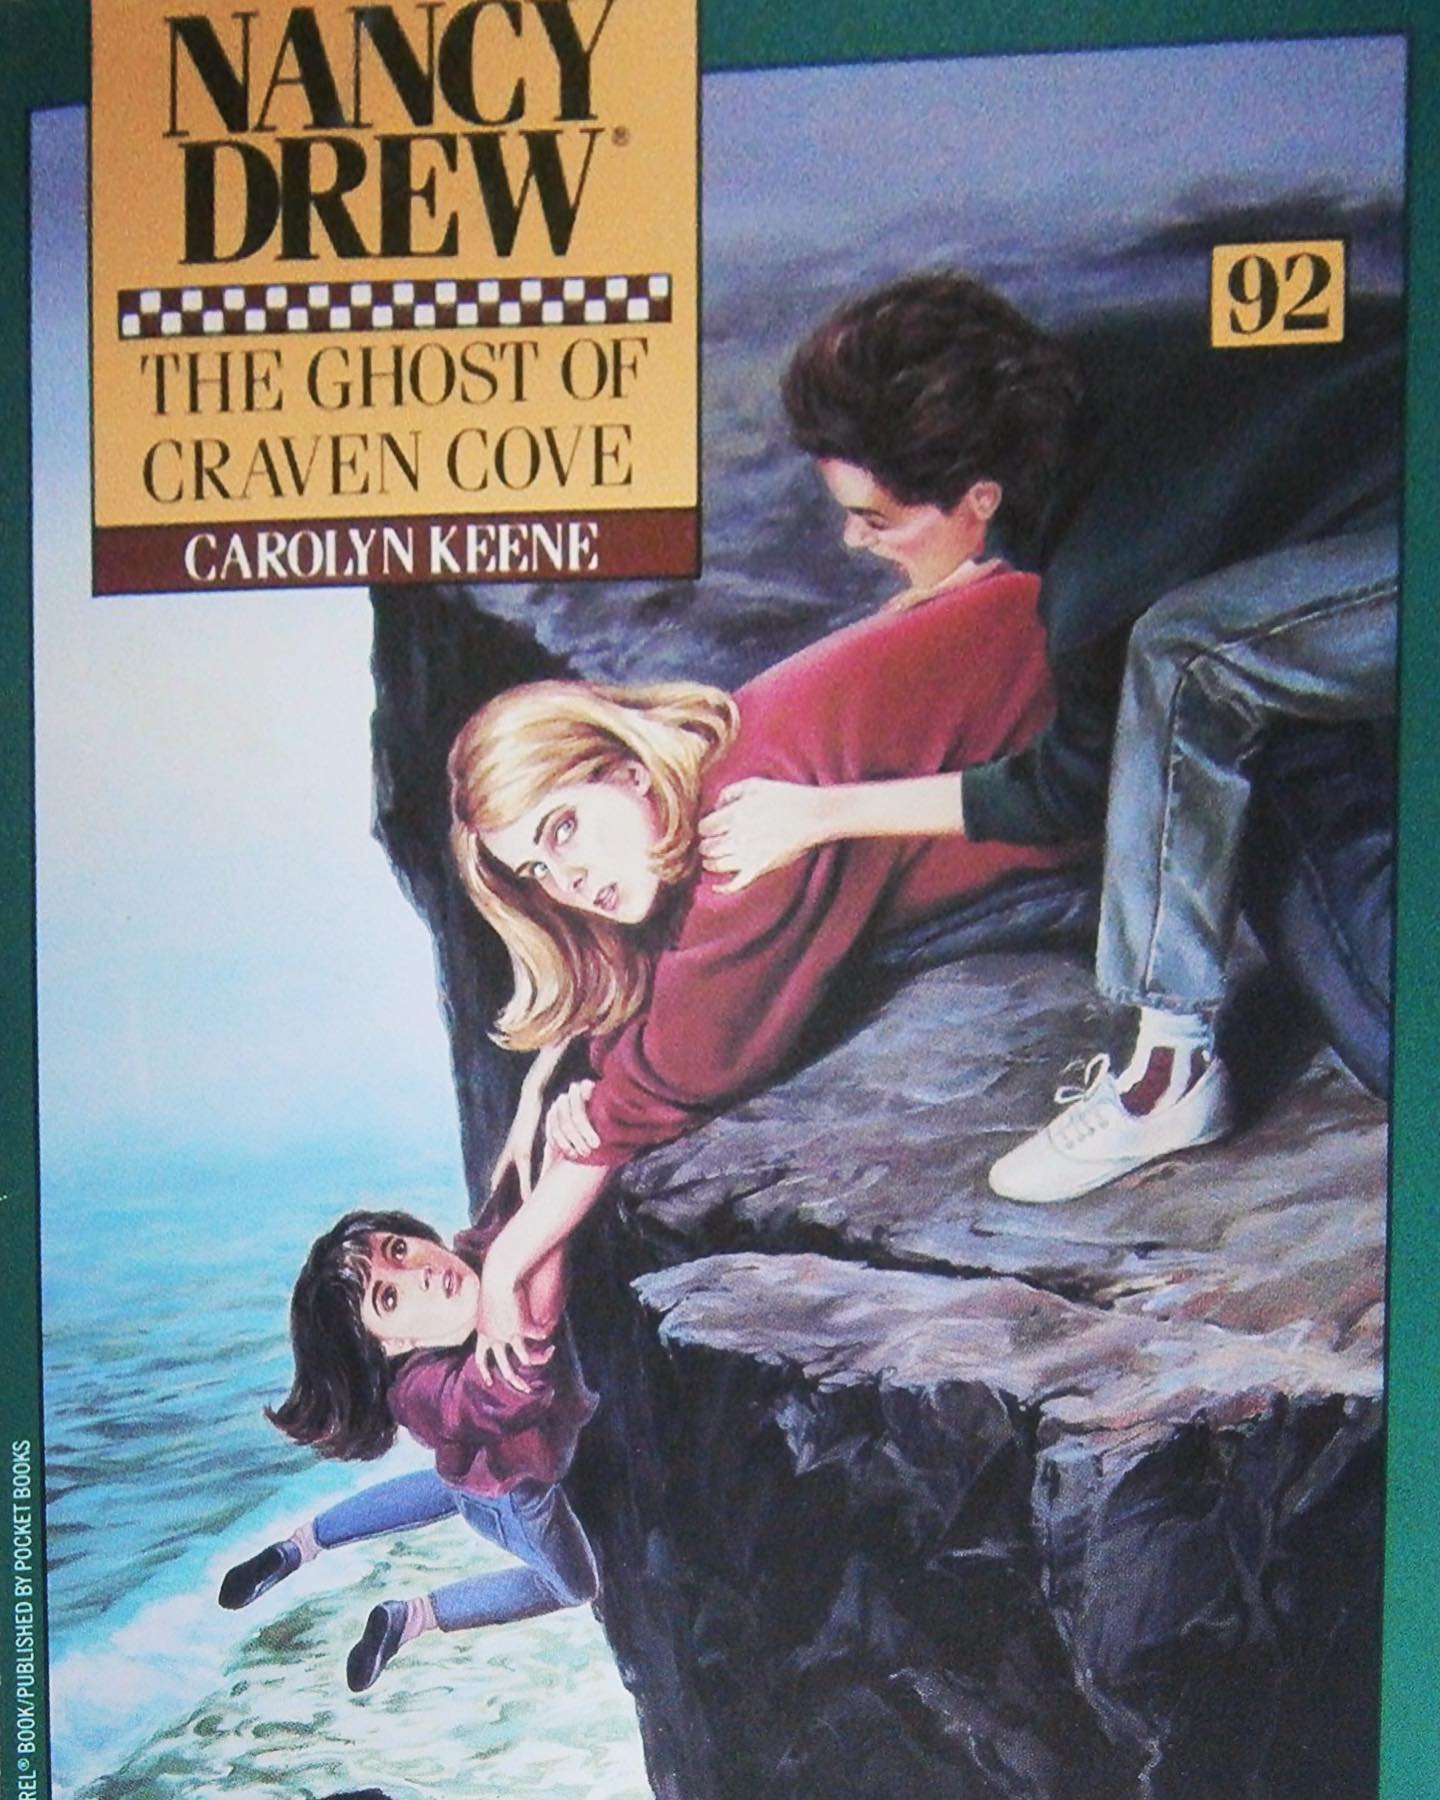 I just finished #theghostofcravencove. 😁
When I read some of the other reviews about it, quite a few people complained about the tempo, “too slow!”, they said. But I didn’t mind. I rather fancied this book. Nancy in Maine, fishermen, lobsters 🦞, caves, fog, a ghost 👻 and more seafood. That’s all I need! 🤘🏻😎

#nancydrew #nancydrewmysterystories #carolynkeene